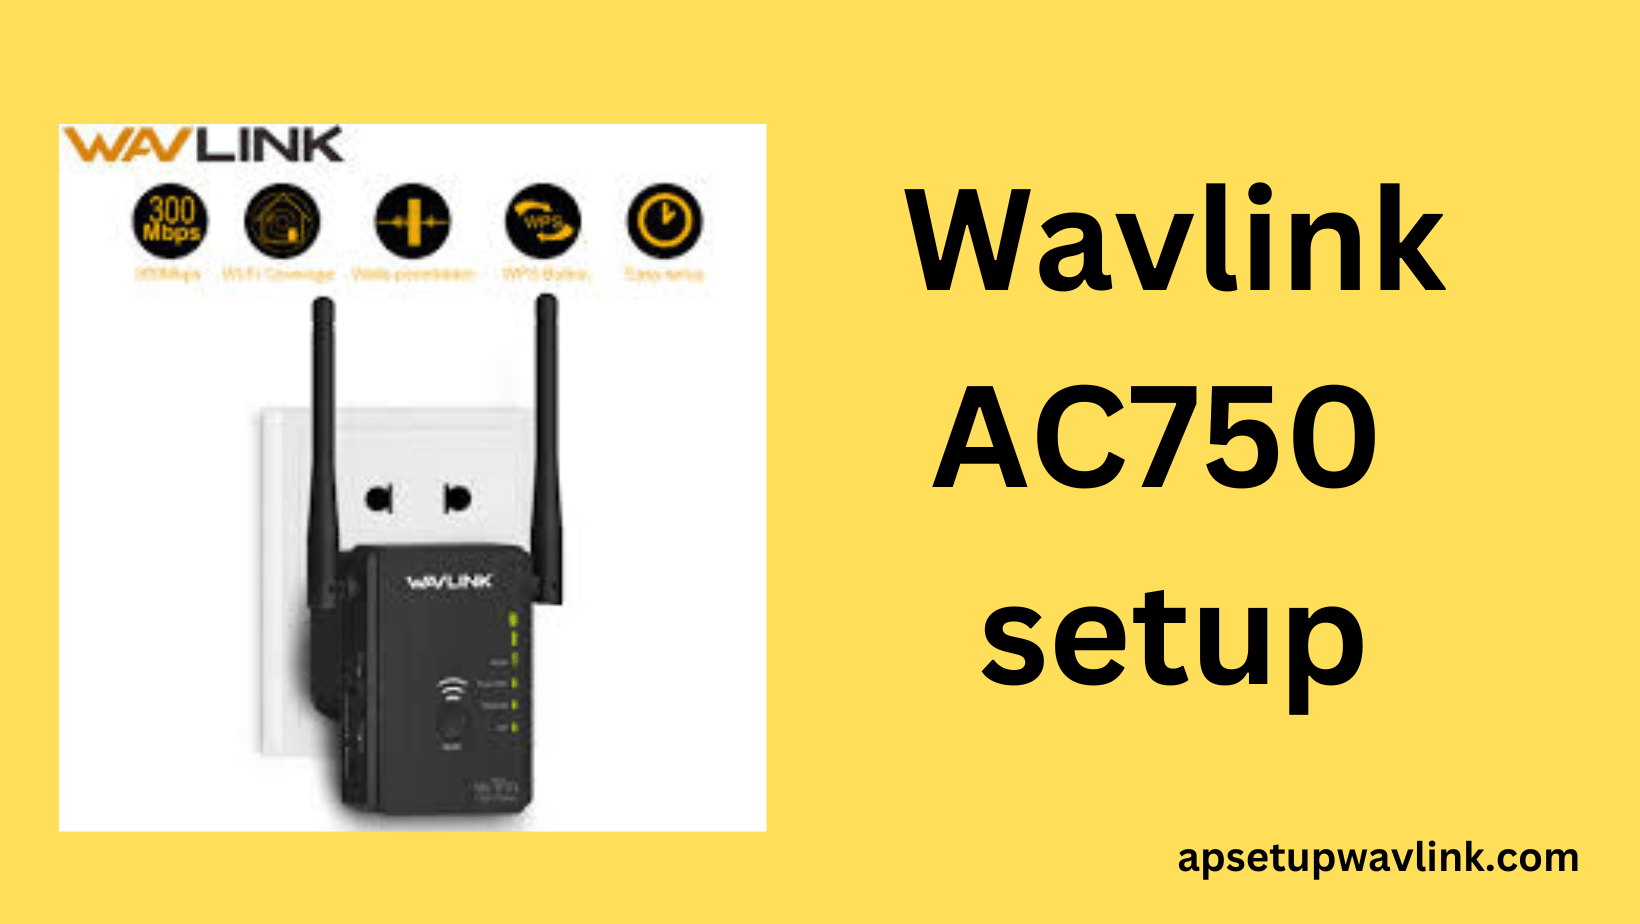 You are currently viewing Wavlink AC750 setup